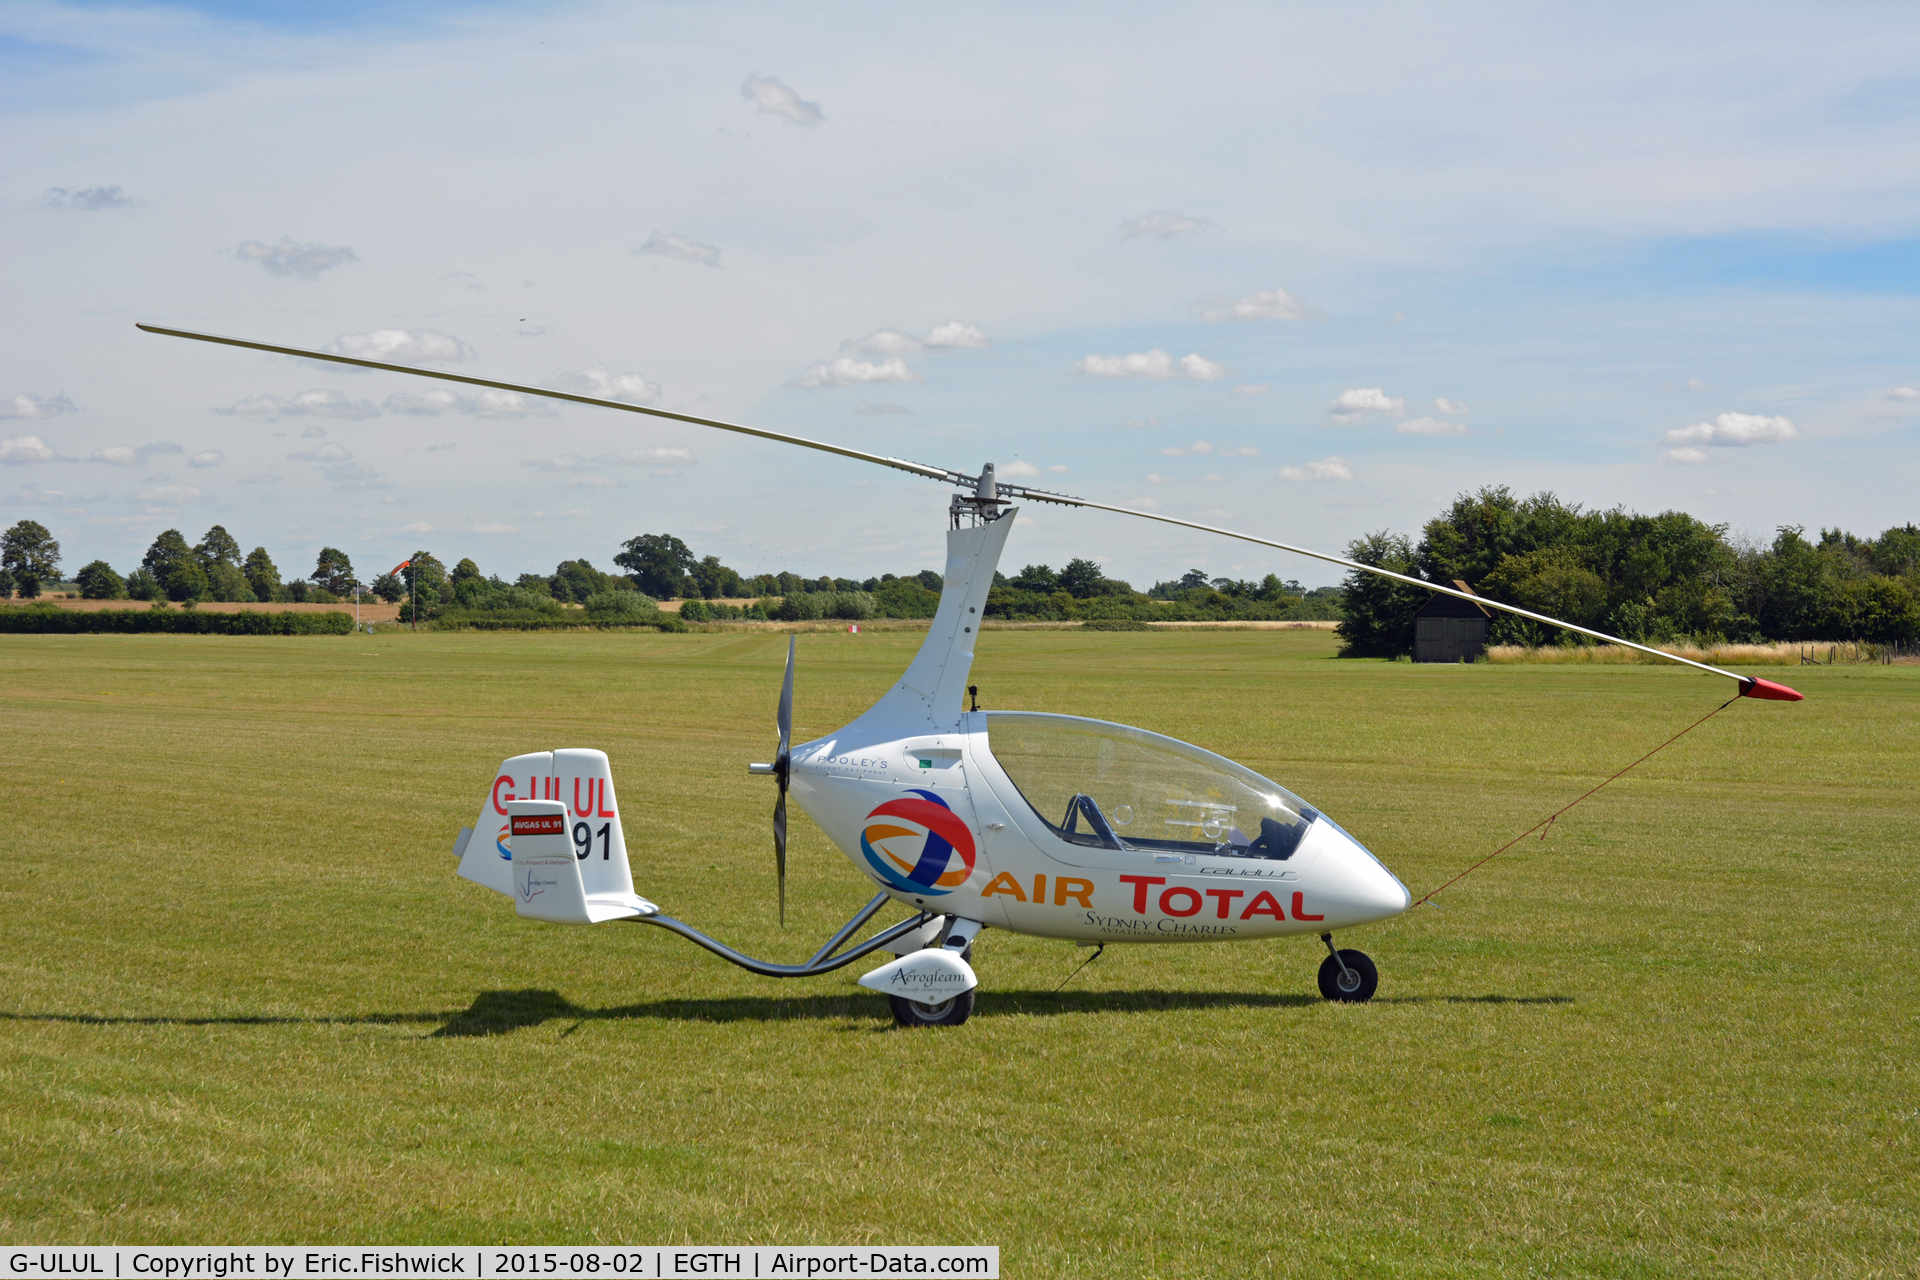 G-ULUL, 2010 RotorSport UK Calidus C/N RSUK/CALS/009, 2. G-ULUL at the Shuttleworth Wings and Wheels Airshow, Aug. 2015.